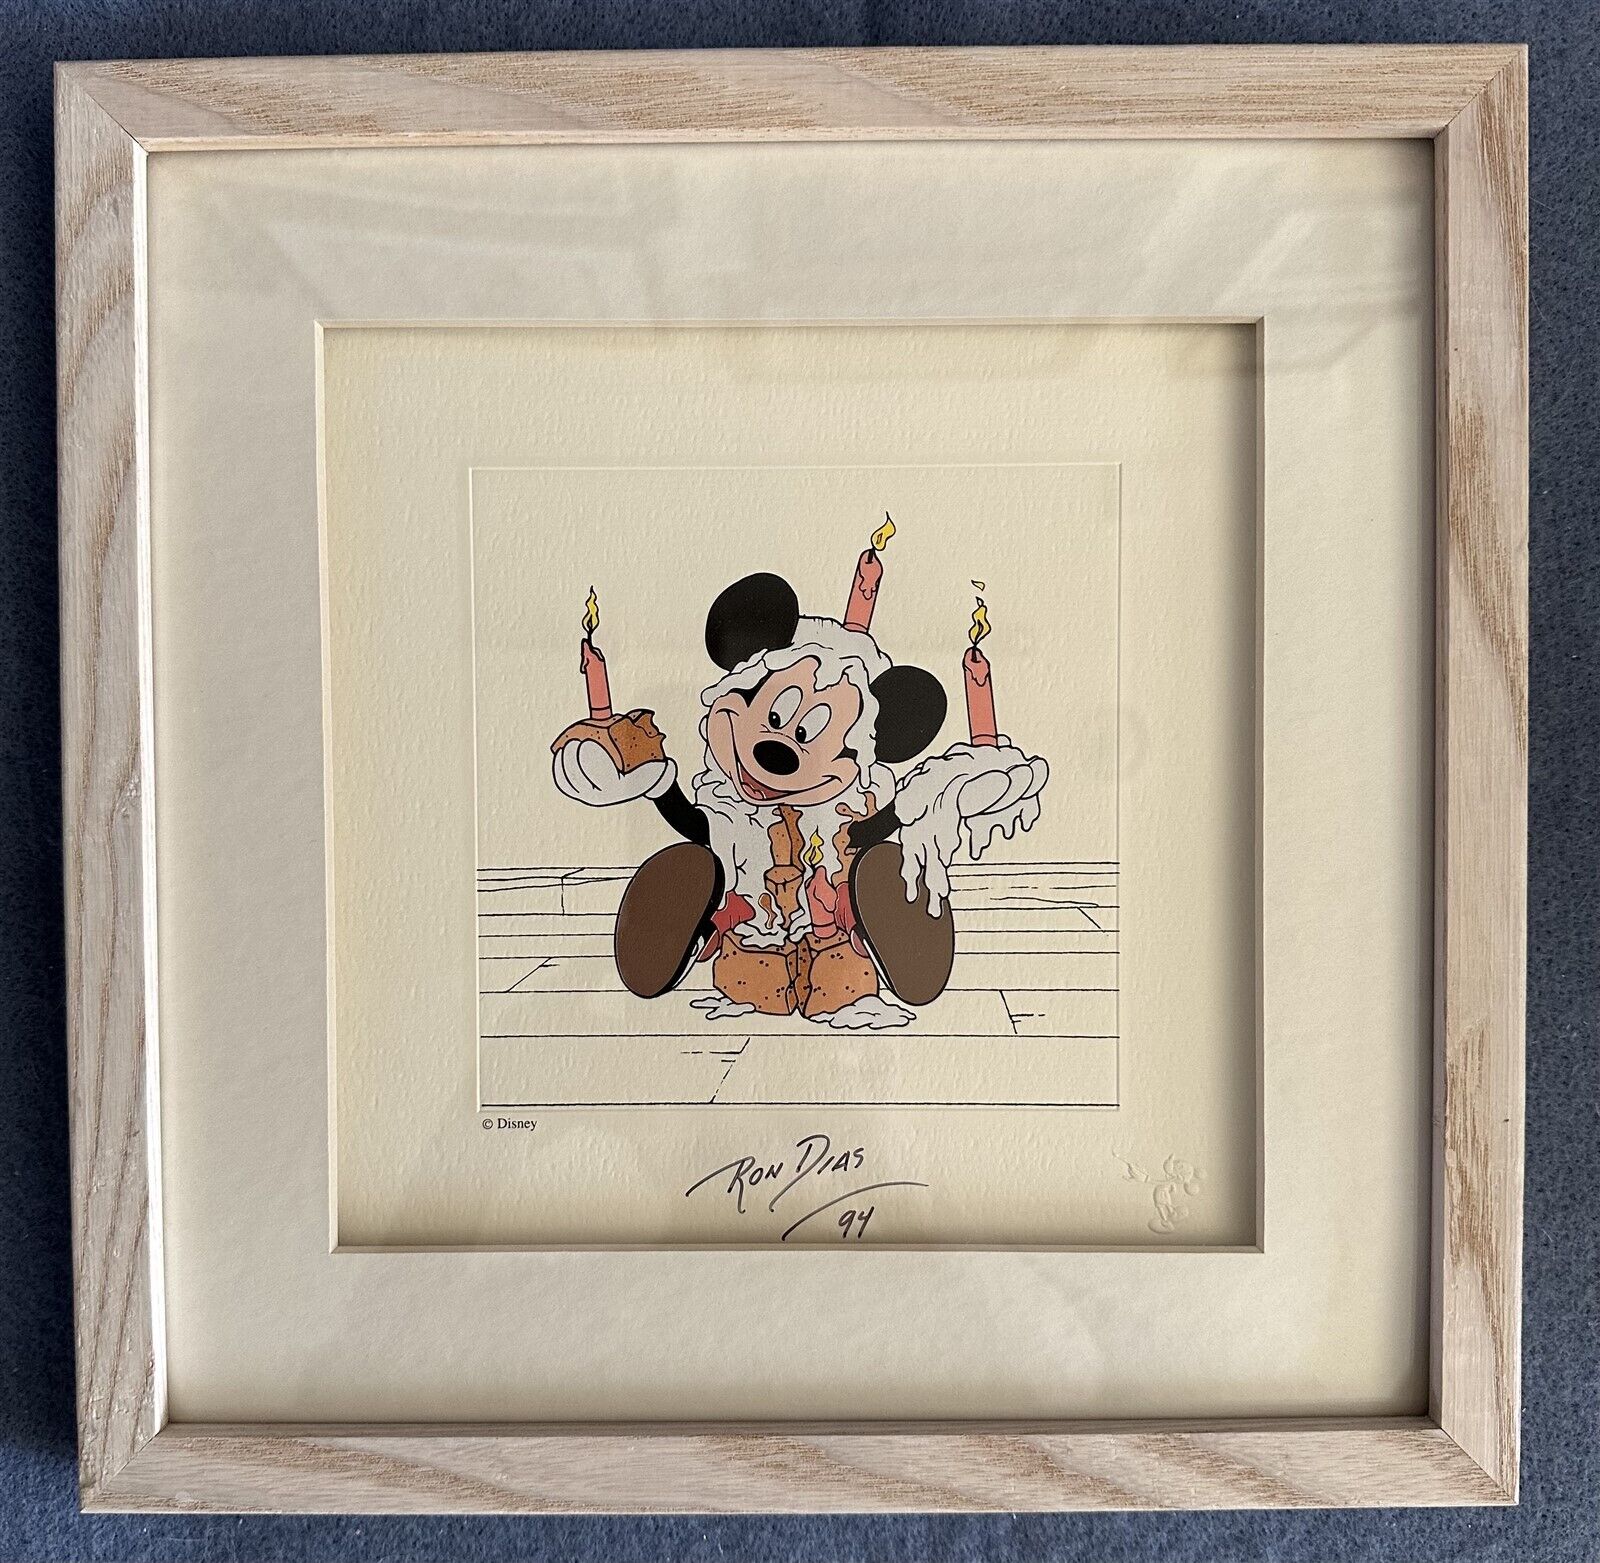 Disney Treasures MICKEY\'S BIRTHDAY PARTY 1942 Framed Print Signed by Artist